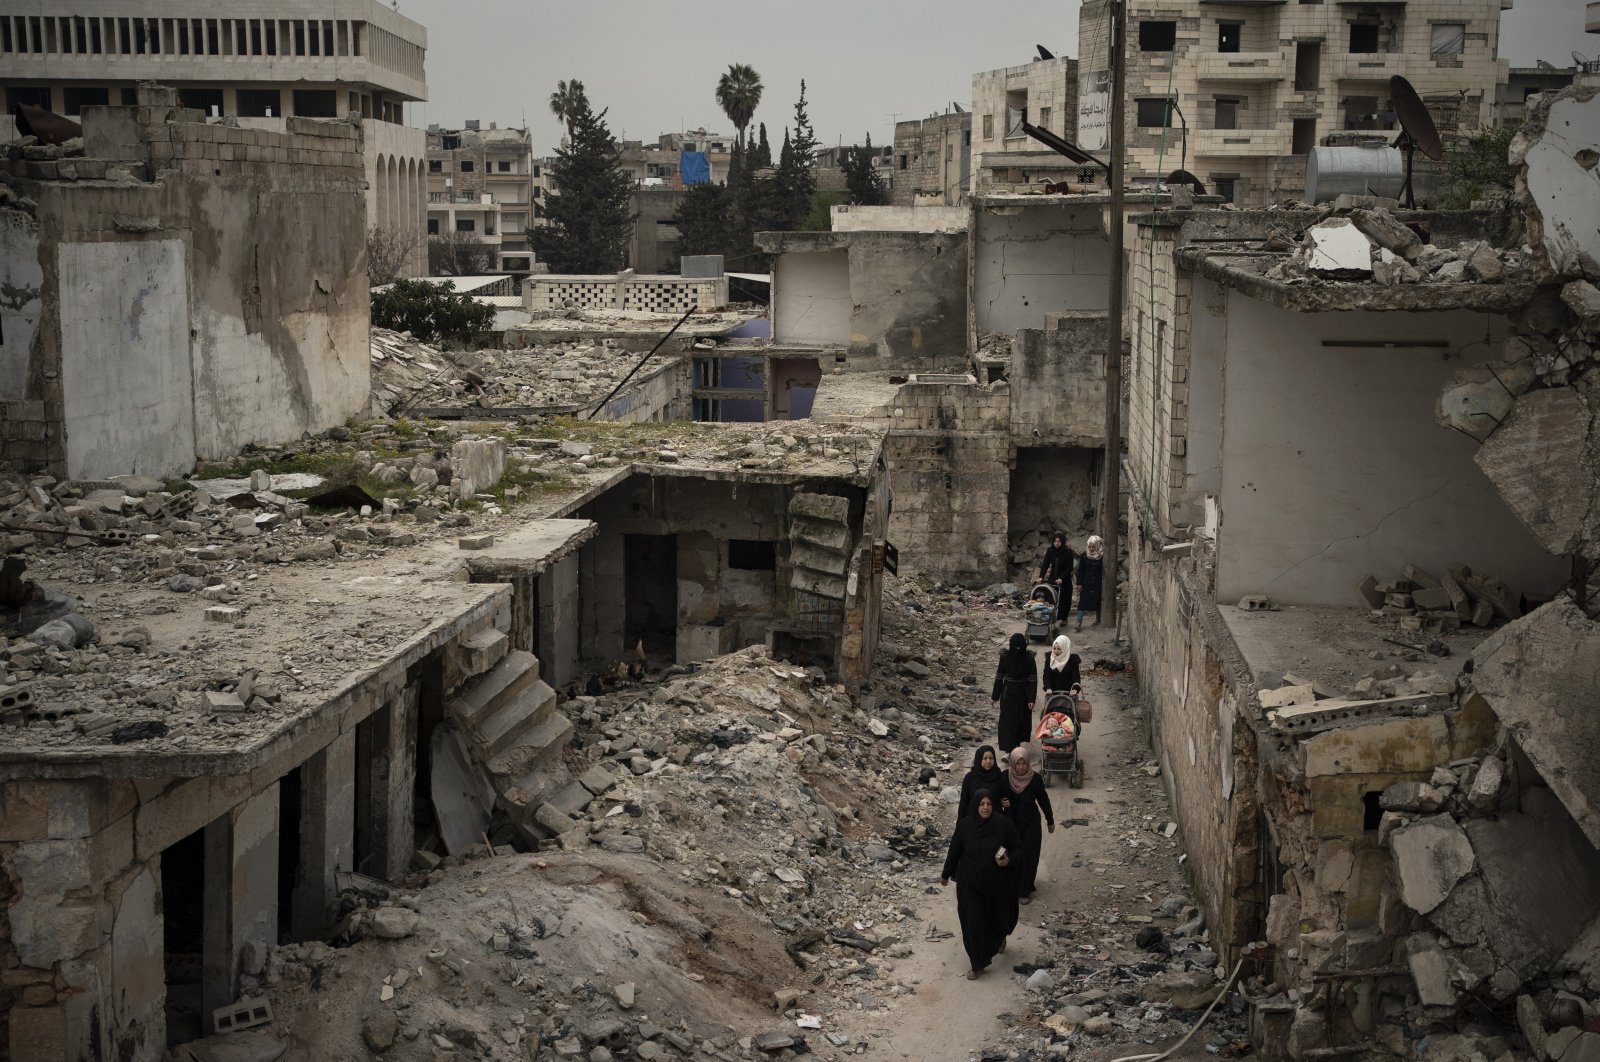 Women walk in a neighborhood heavily damaged by airstrikes in Idlib, Syria, March 12, 2020. (AP)